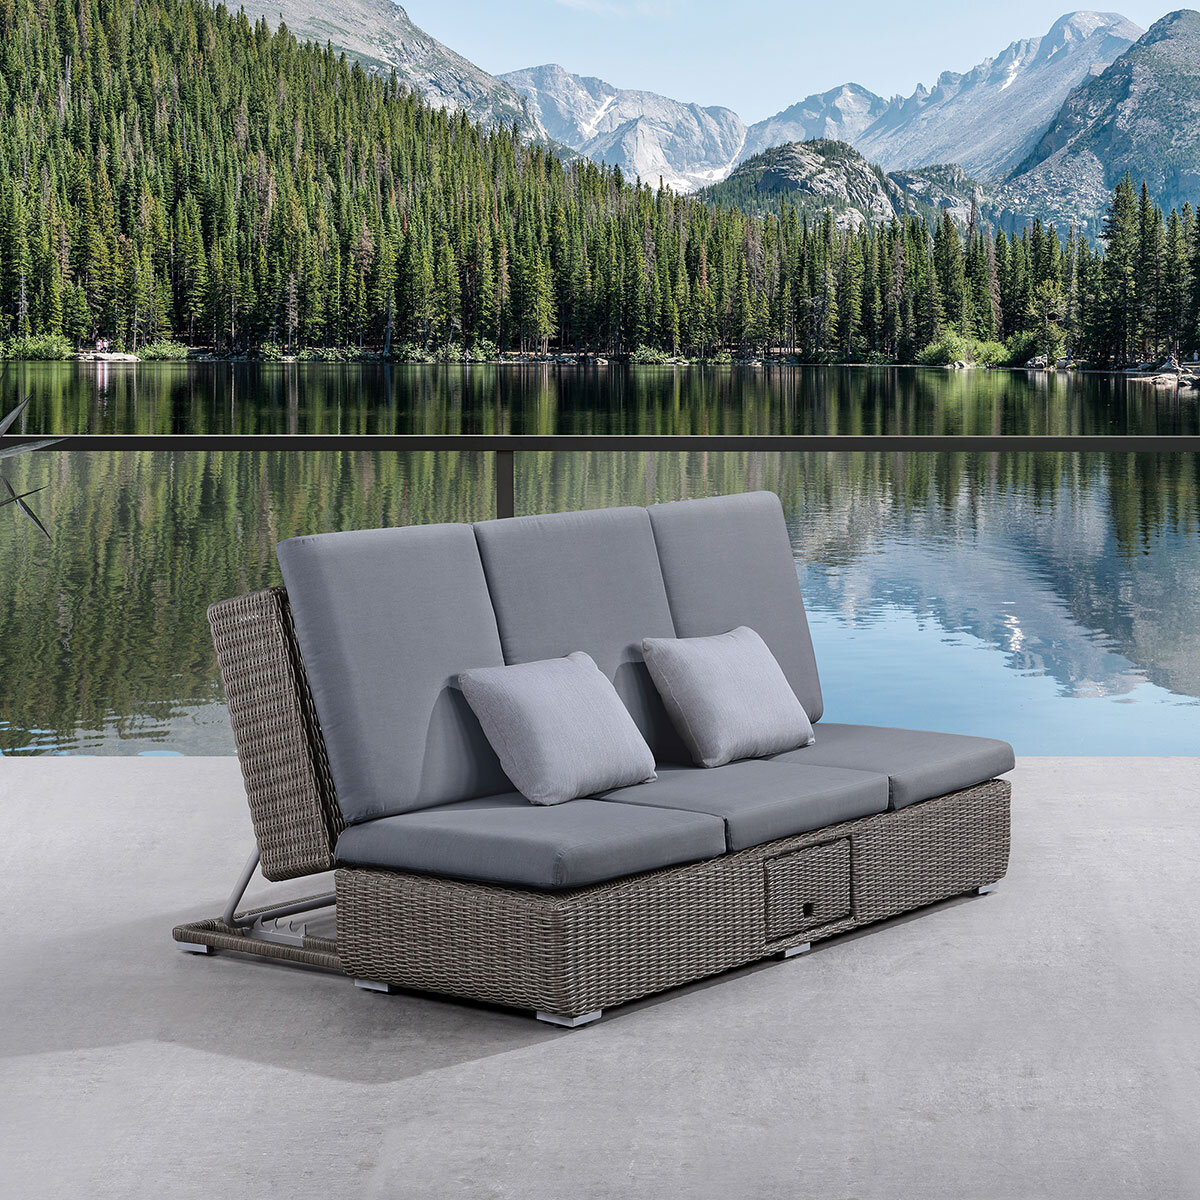 OVE Decors Nadia Daybed Lounger 